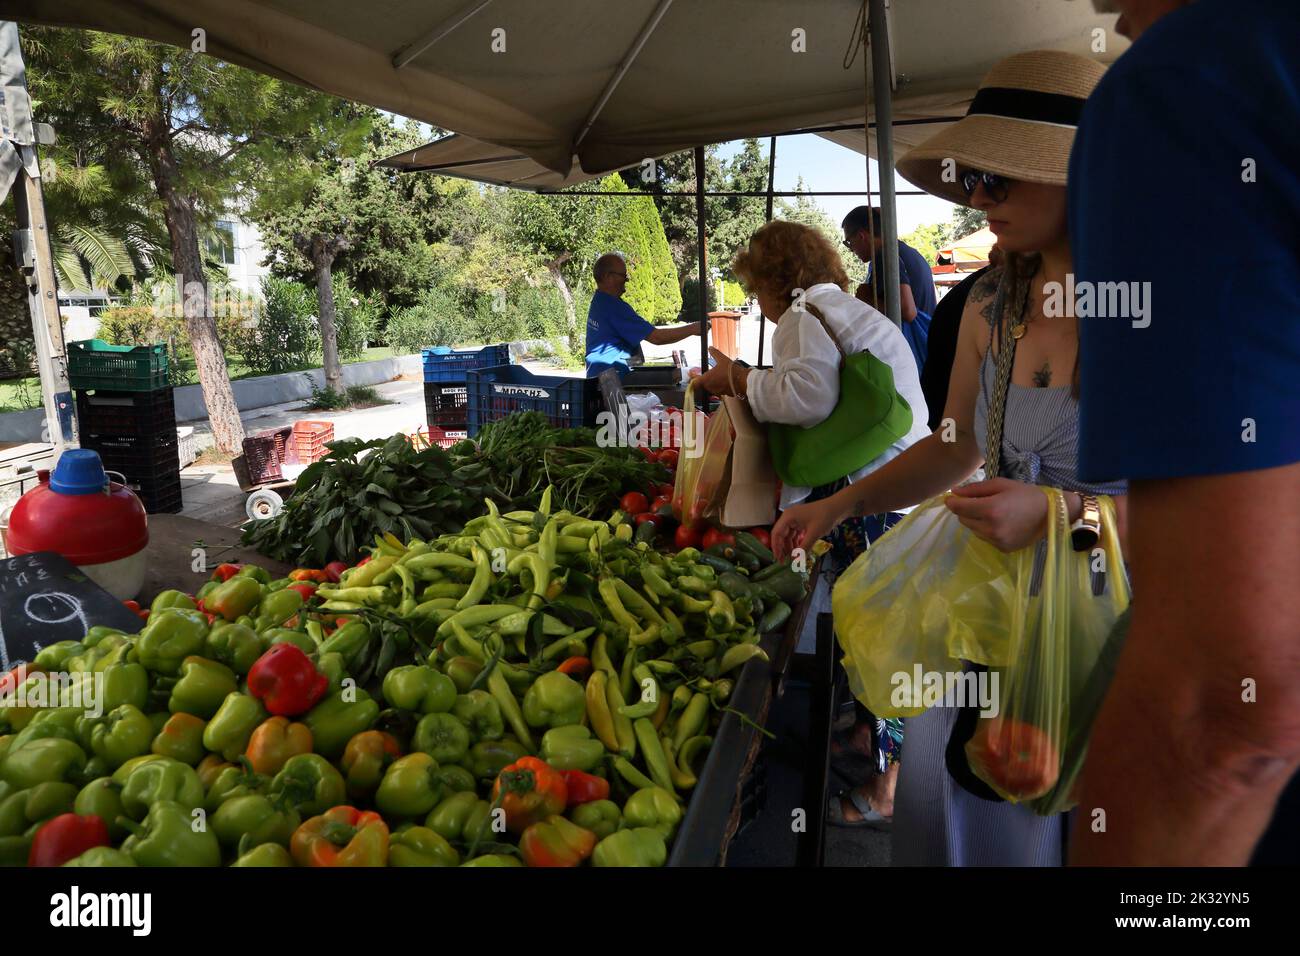 People Shopping at Saturday Market For Fruit And Vegetables Vouliagmeni Athens Greece Stock Photo